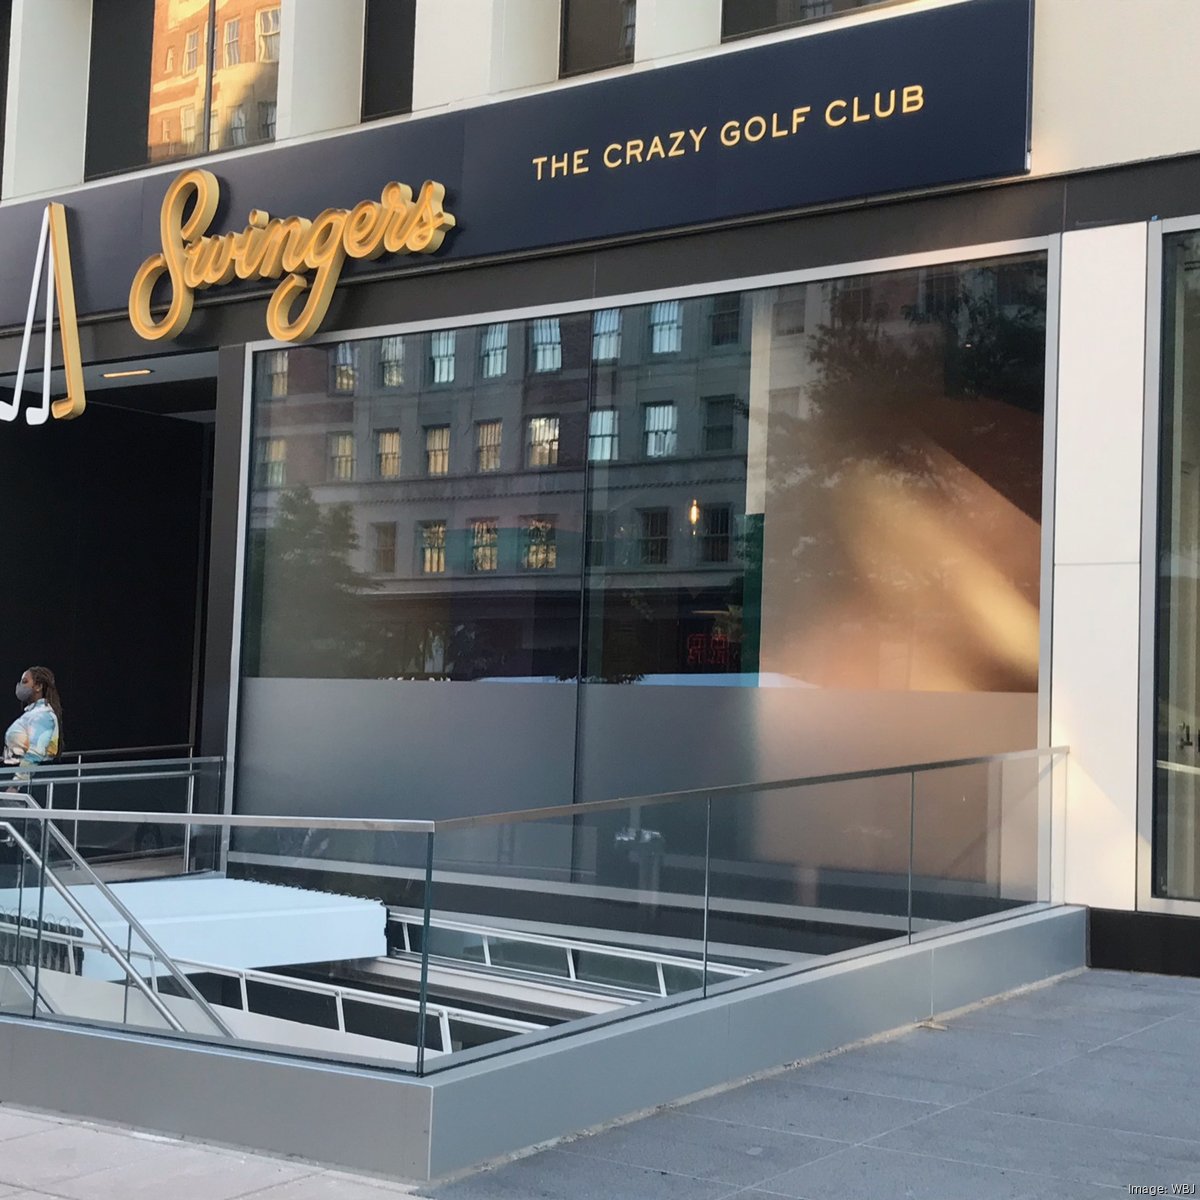 Swingers, the London-based golf entertainment center, signs on with Jair Lynch at the Navy Yard image